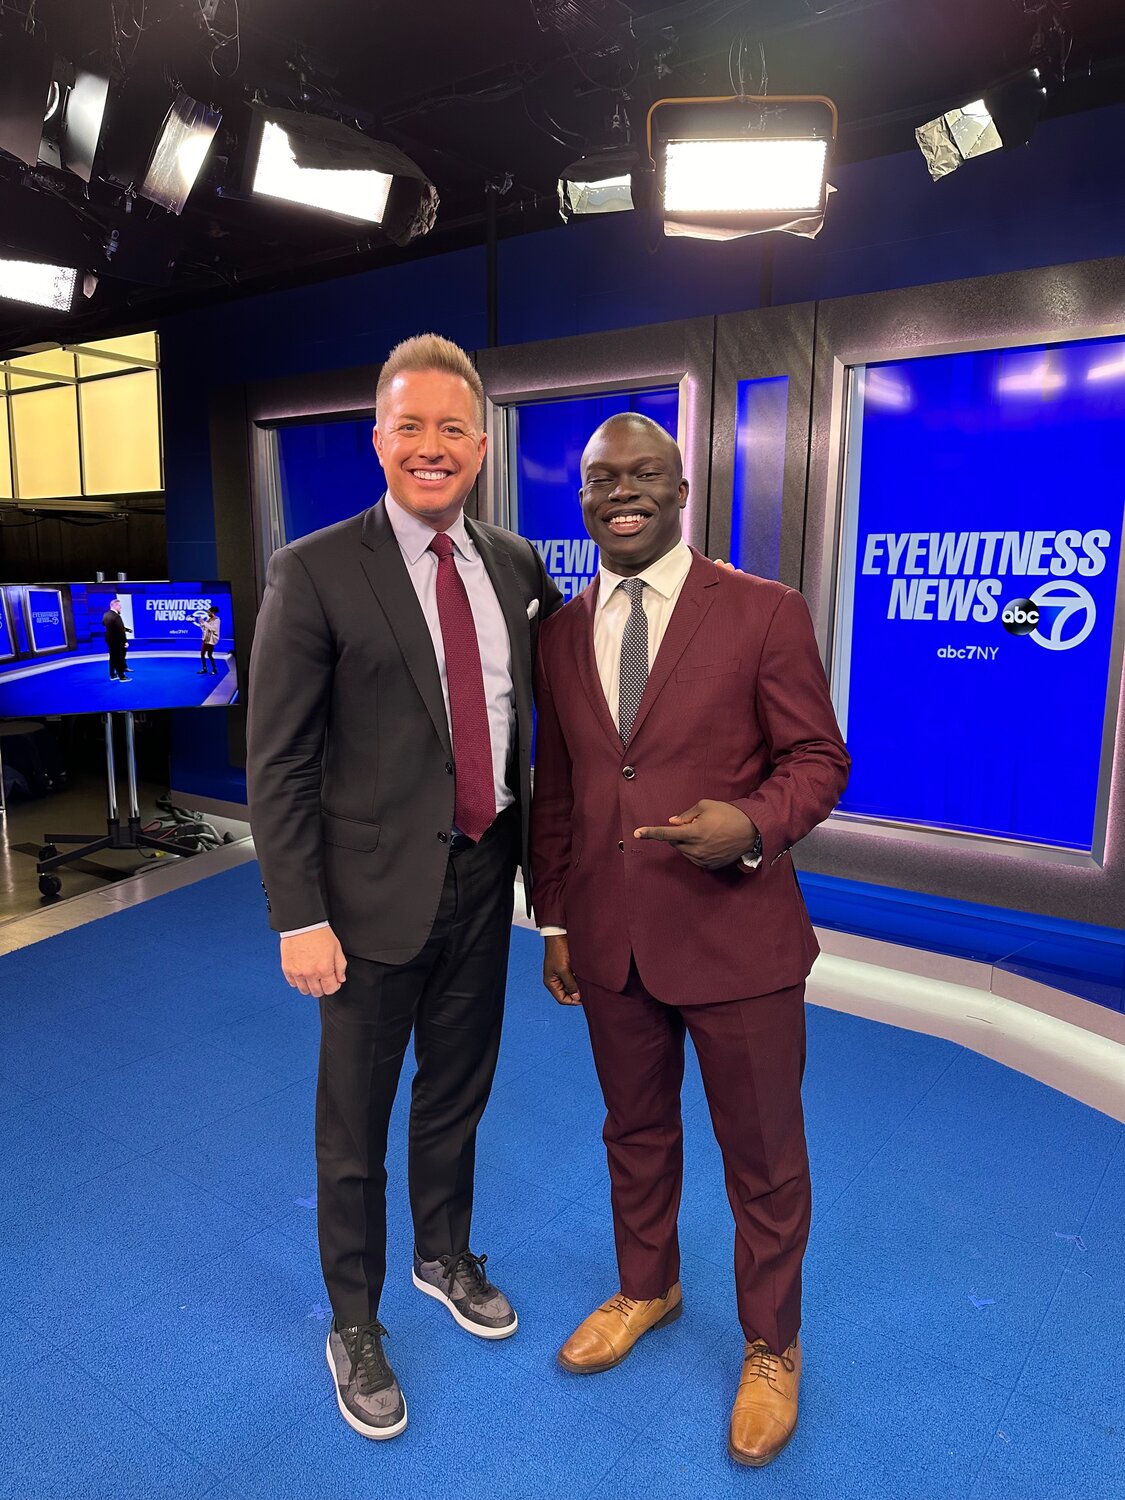 Ryan Field, WABC-TV sports reporter, with Yaw Bonsu, a Hofstra student who will be covering the Super Bowl for the university’s radio station.